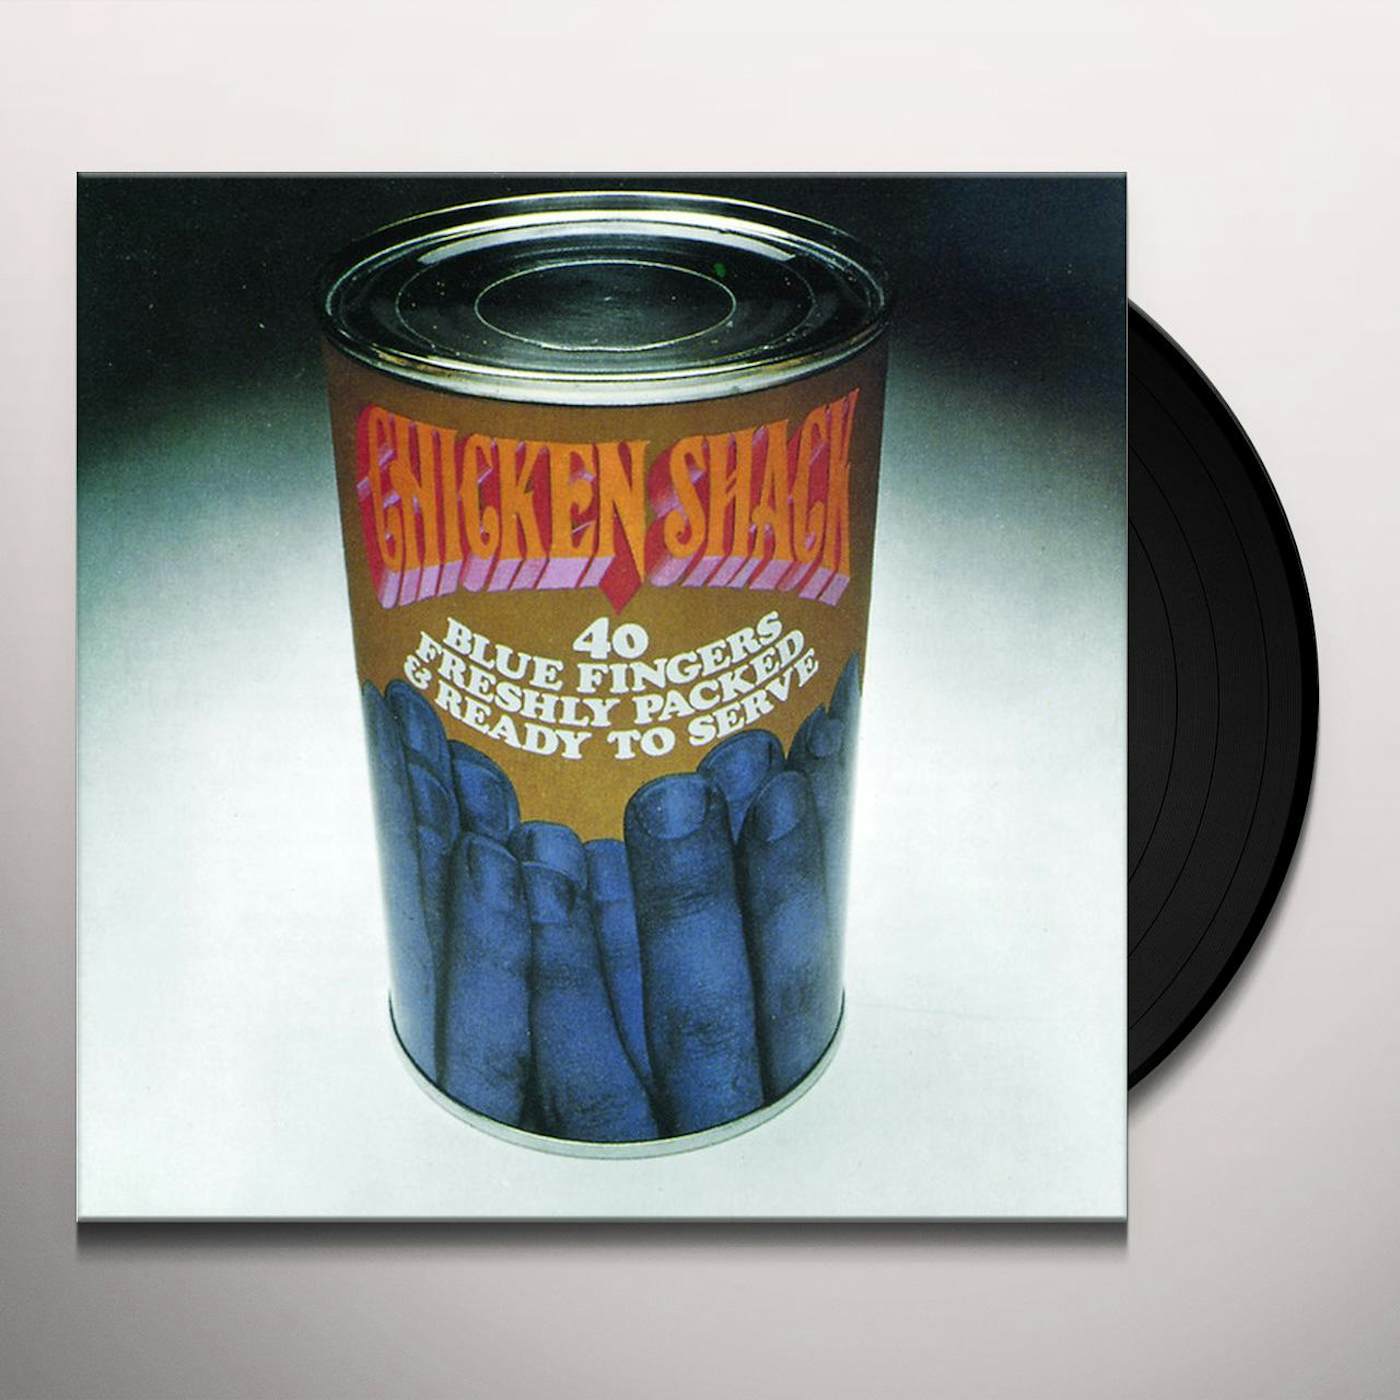 Chicken Shack 40 BLUE FINGERS FRESHLY PACKED & READY TO SERVE Vinyl Record